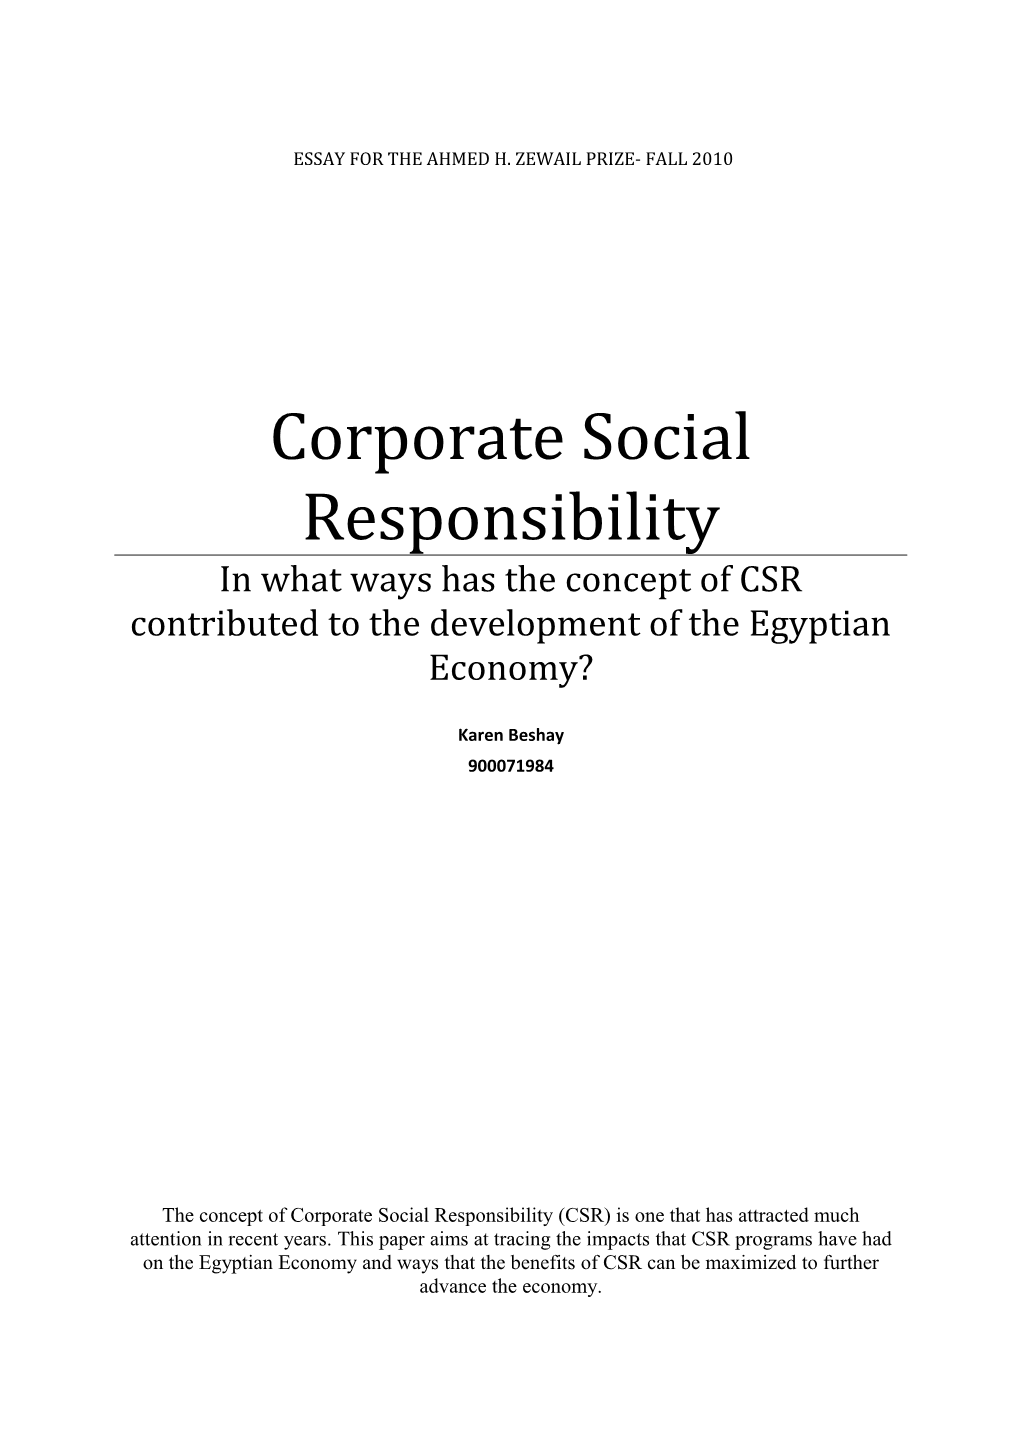 Corporate Social Responsibility s1